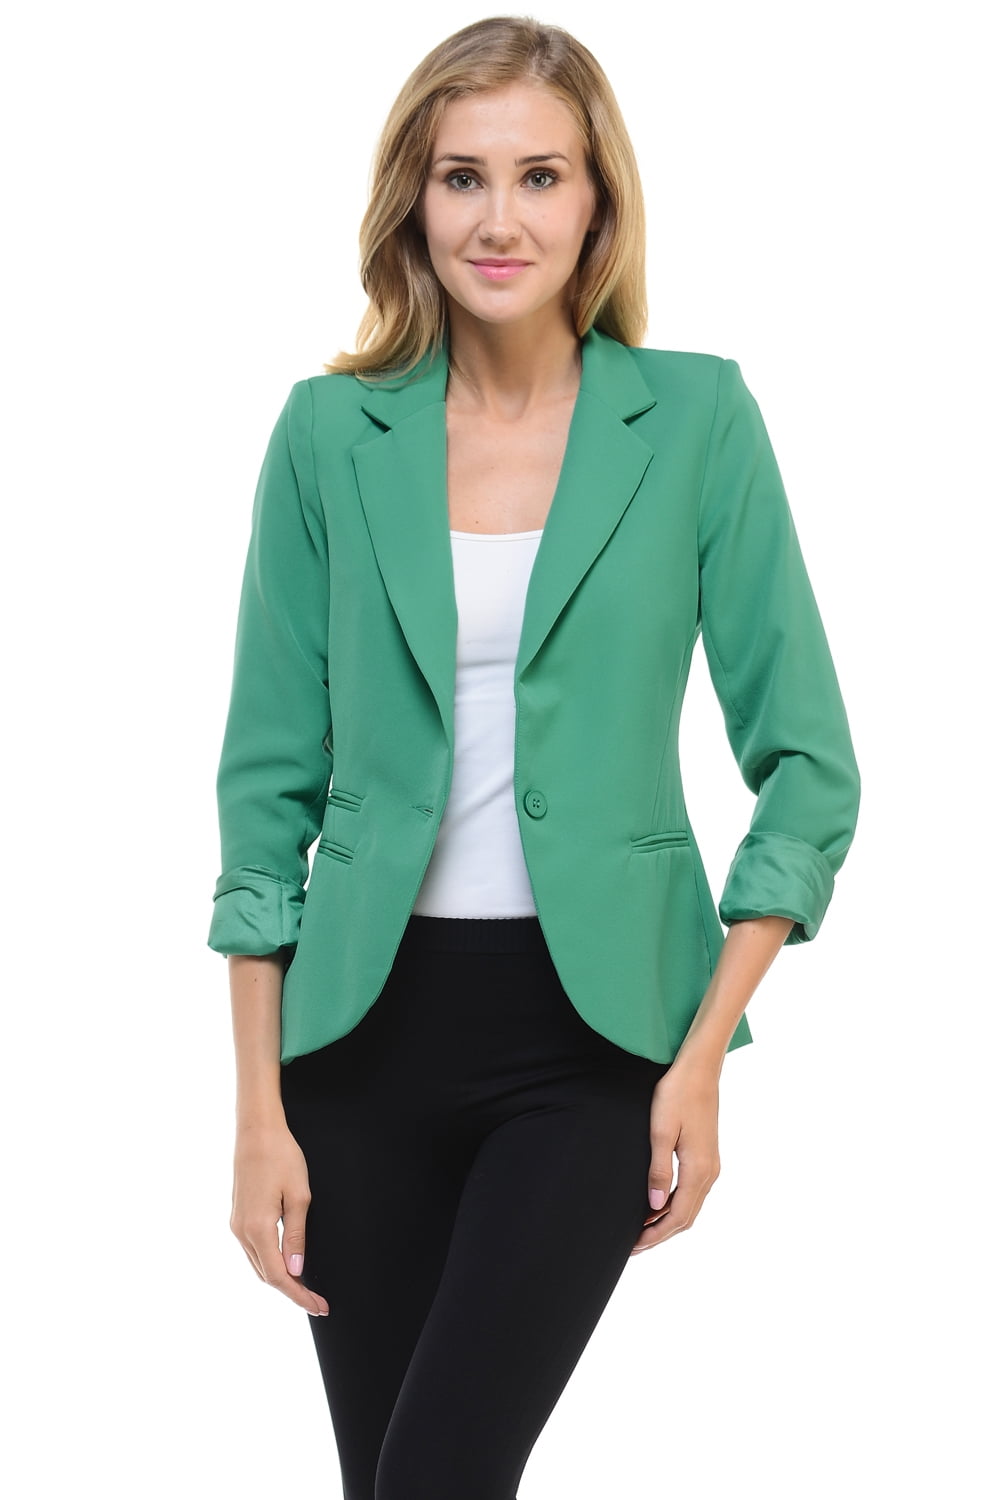 Auliné Collection Womens Candy Color Long Sleeve Lined Blazer - Walmart.com